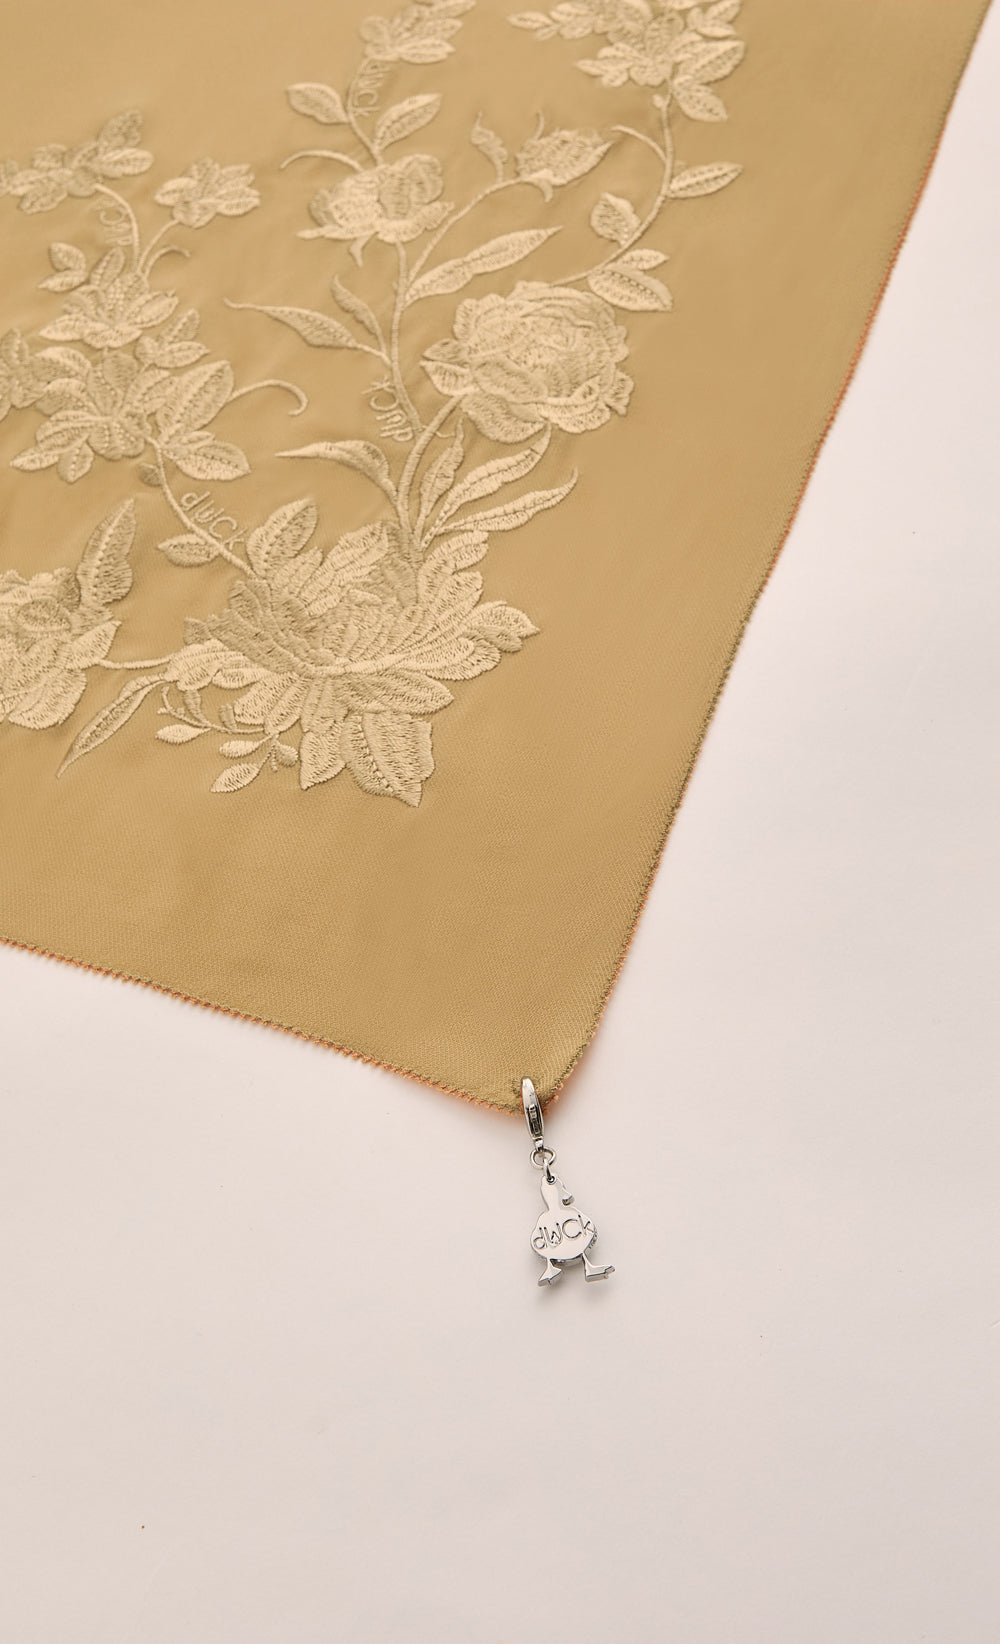 The Peonies Embroidery dUCk Square Scarf in Sand